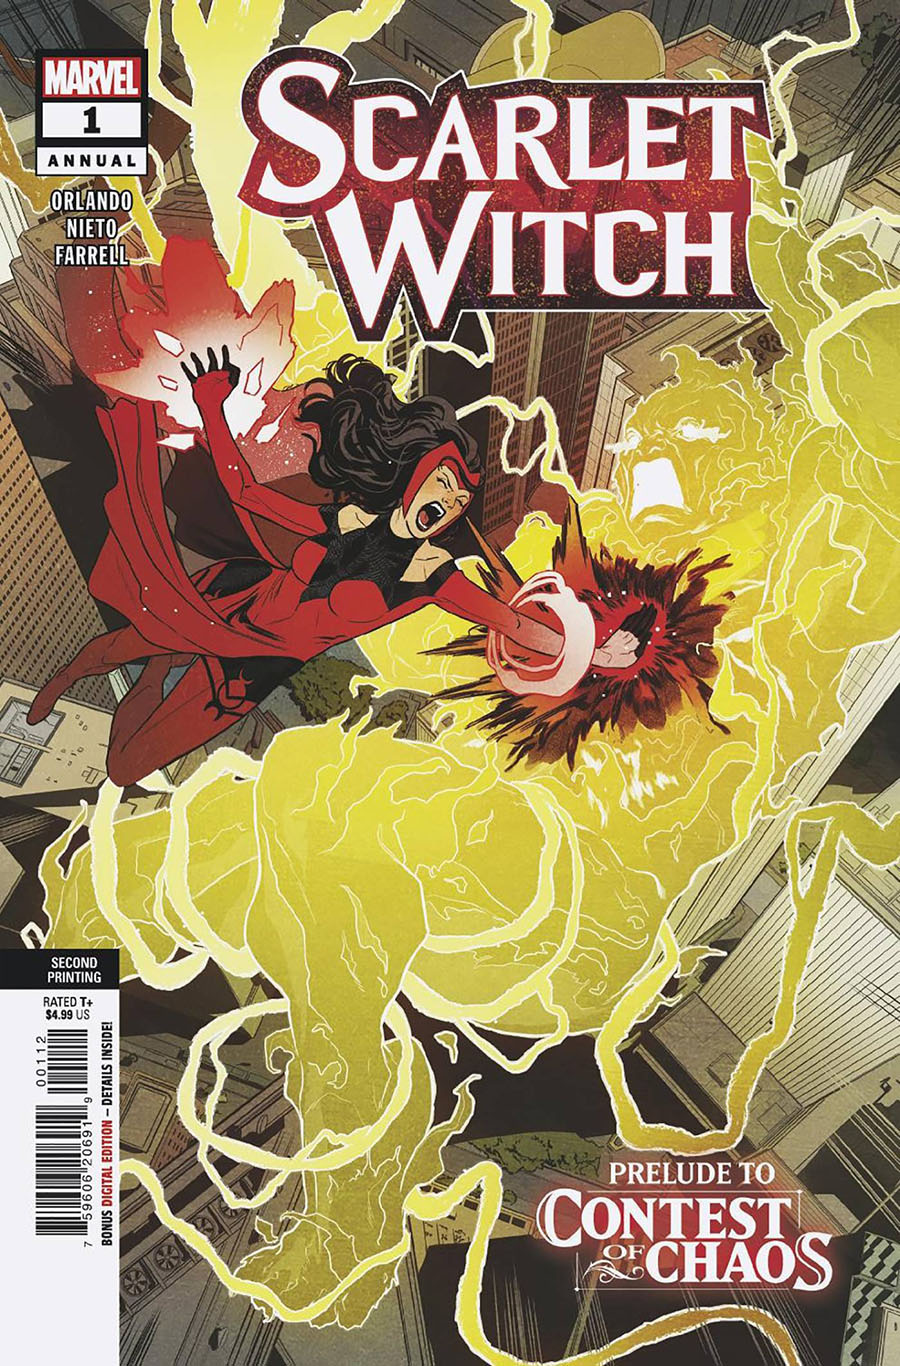 Scarlet Witch Vol 3 Annual #1 Cover F 2nd Ptg Carlos Nieto Variant Cover (Contest Of Chaos Tie-In)